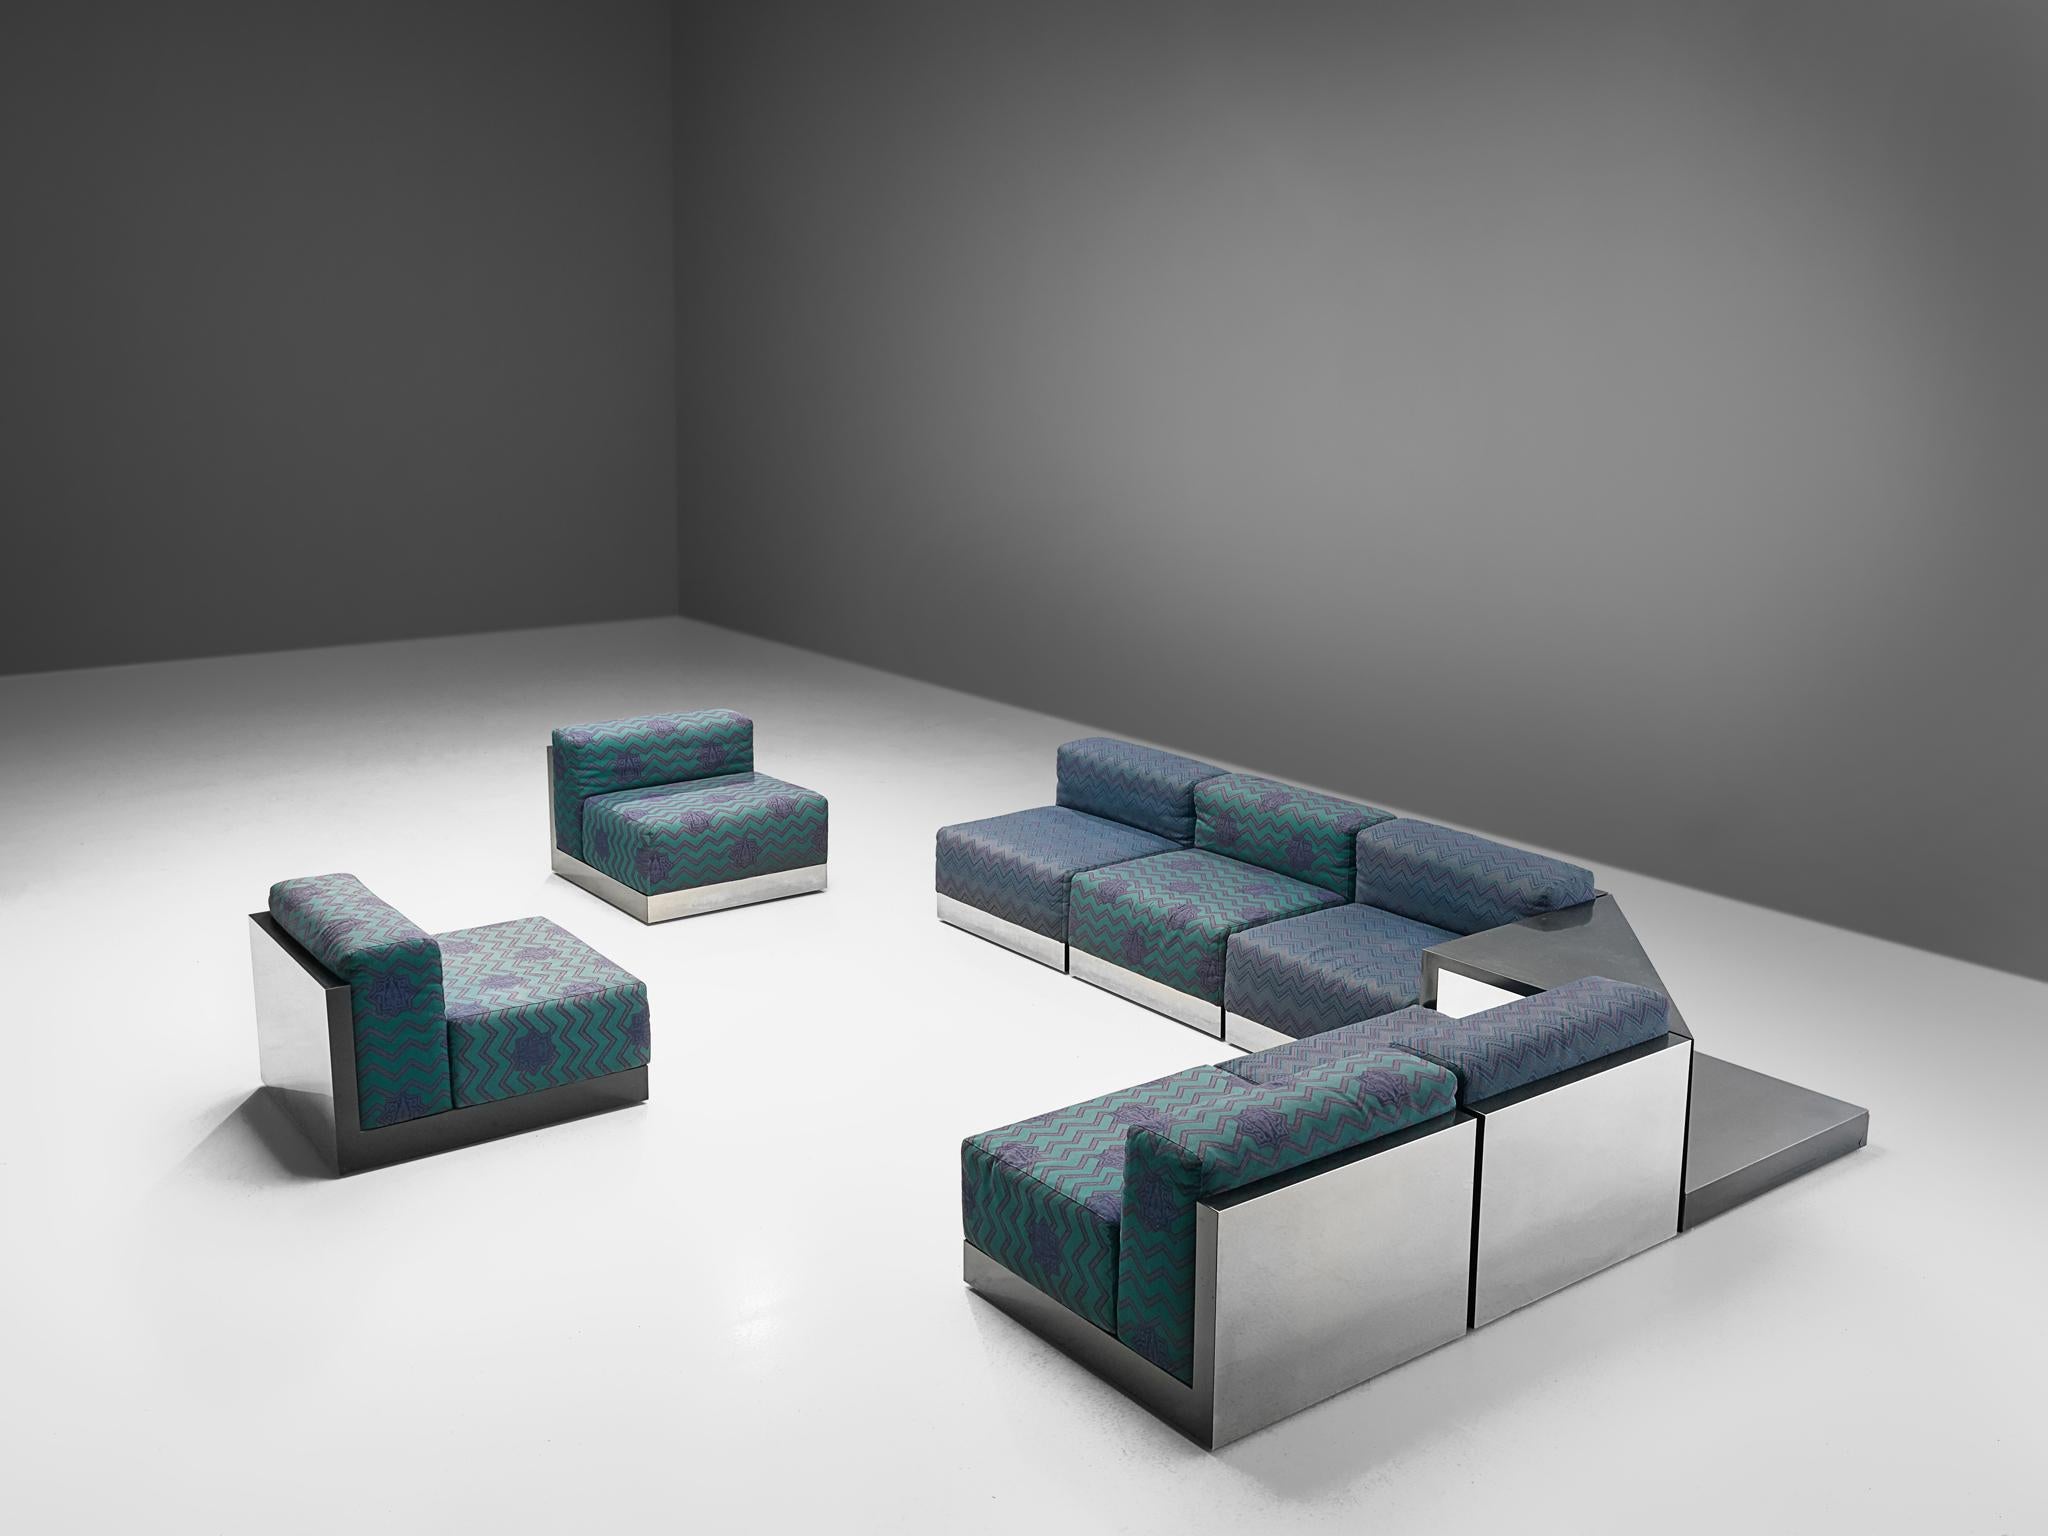 Sectional sofa, laminated wood, steel, fabric, Italy, 1980s

A Postmodern modular Livingroom set, consisting of 7 seating elements and one corner element usable as a side table. A perfect piece to place in a large space as it can be positioned as